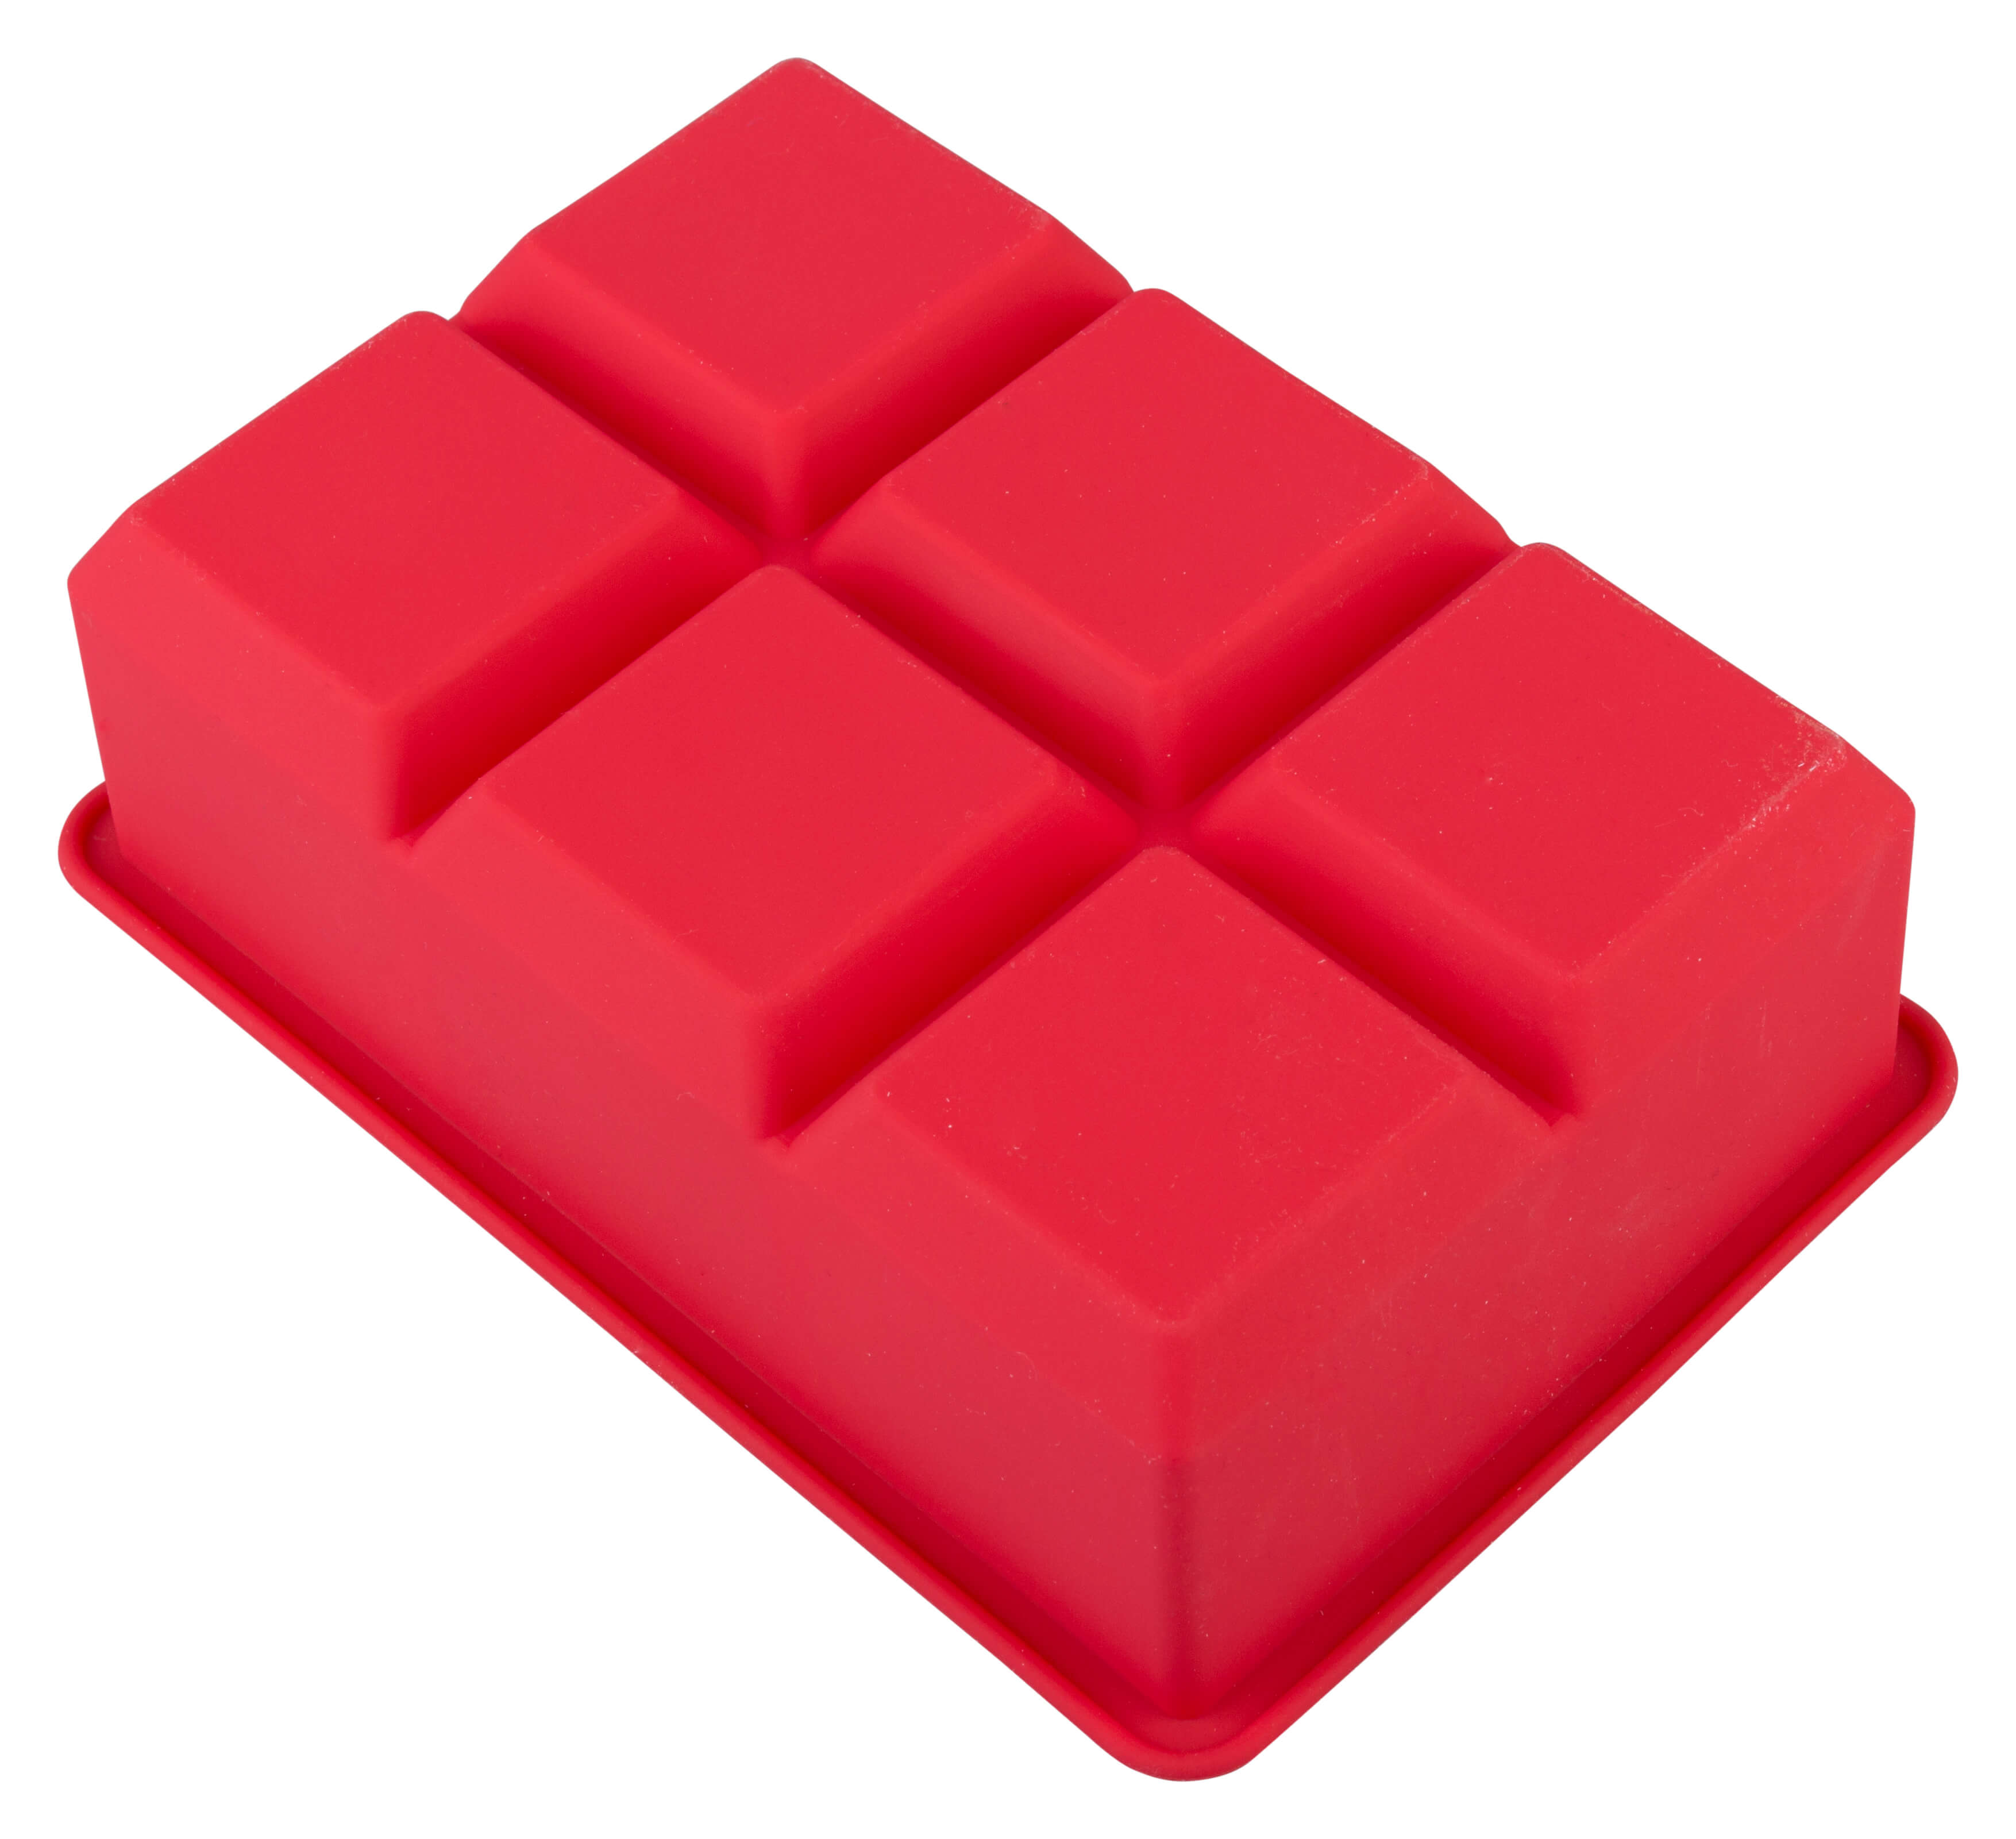 Ice tray 6 cubes, silicone, red - 4,5cm